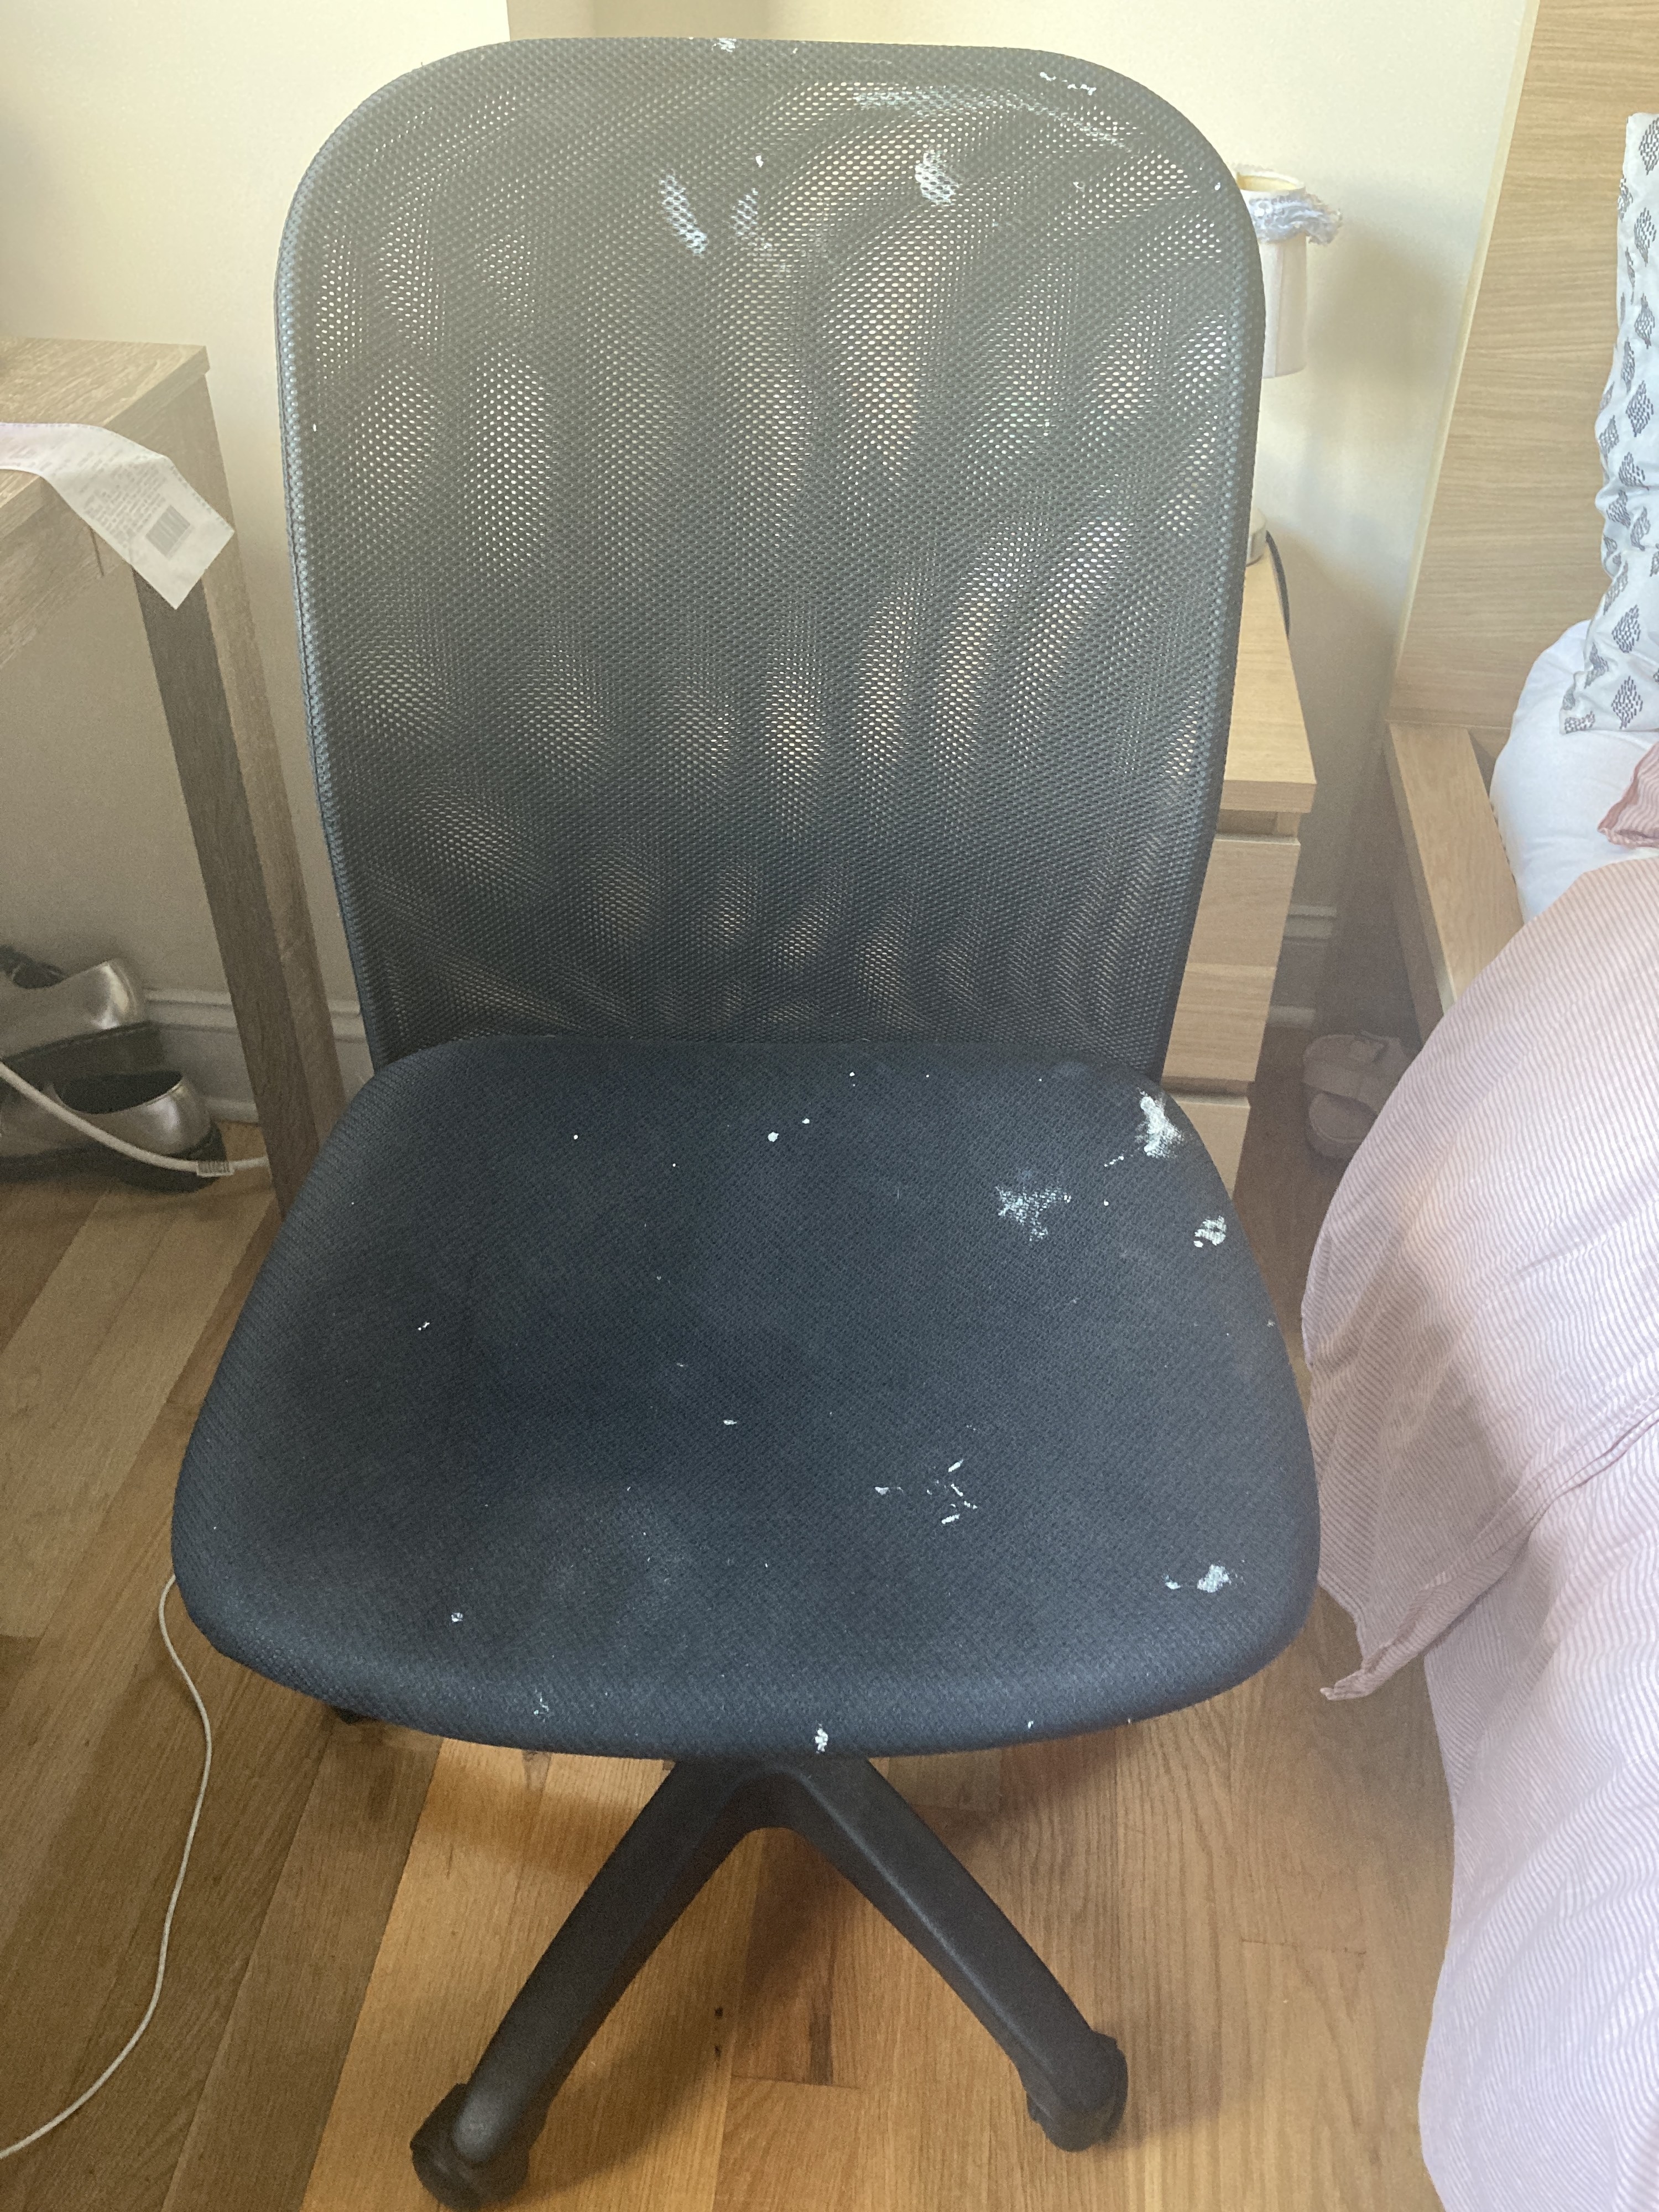 A basic desk chair covered in paint splatters